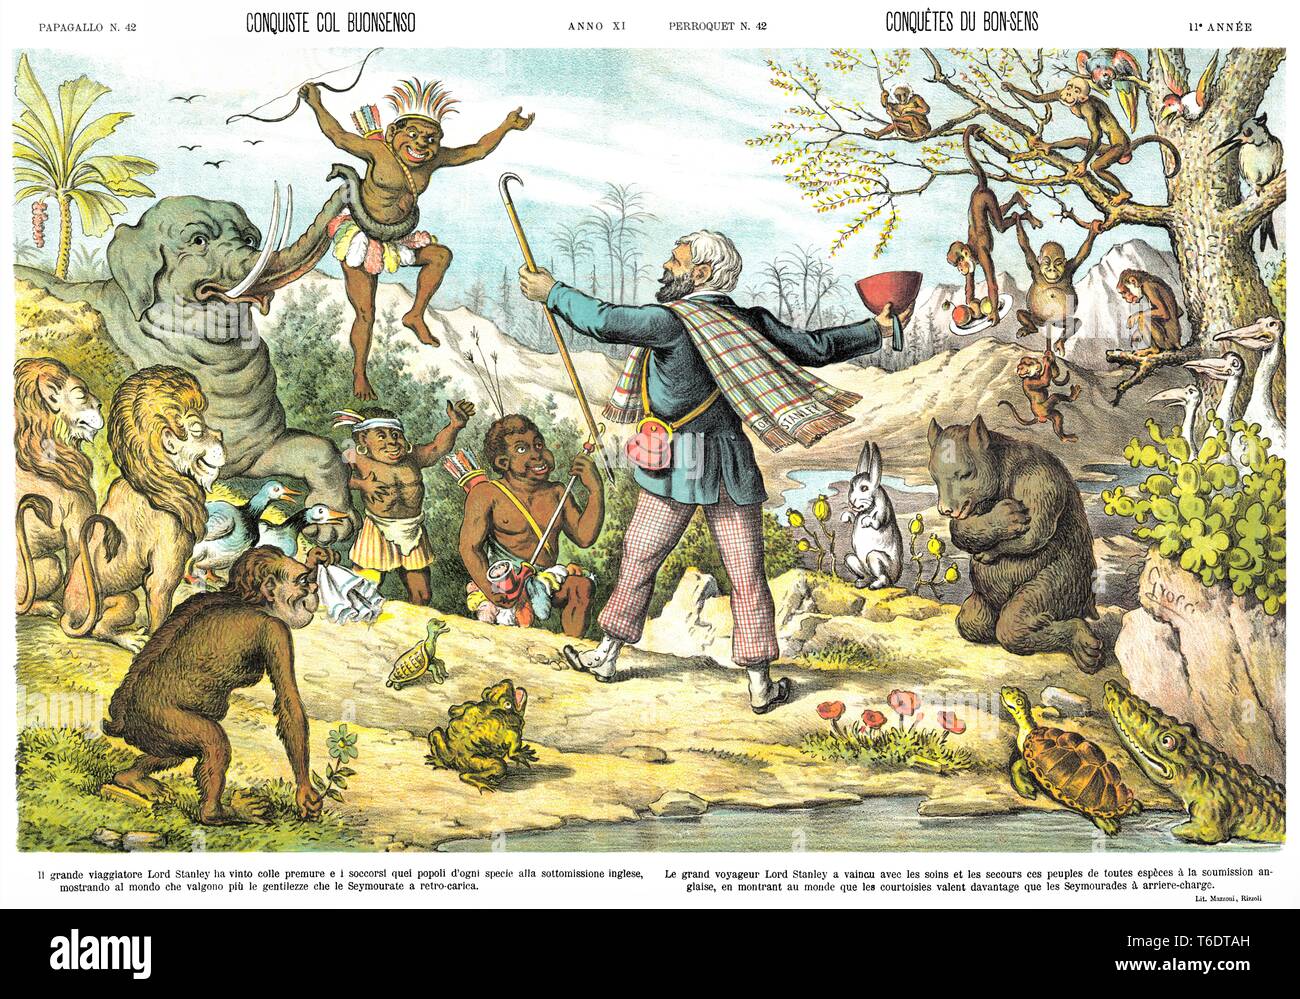 Conquests with common sense,  by satirical cartoon weekly Il Papagallo 1883 Stock Photo